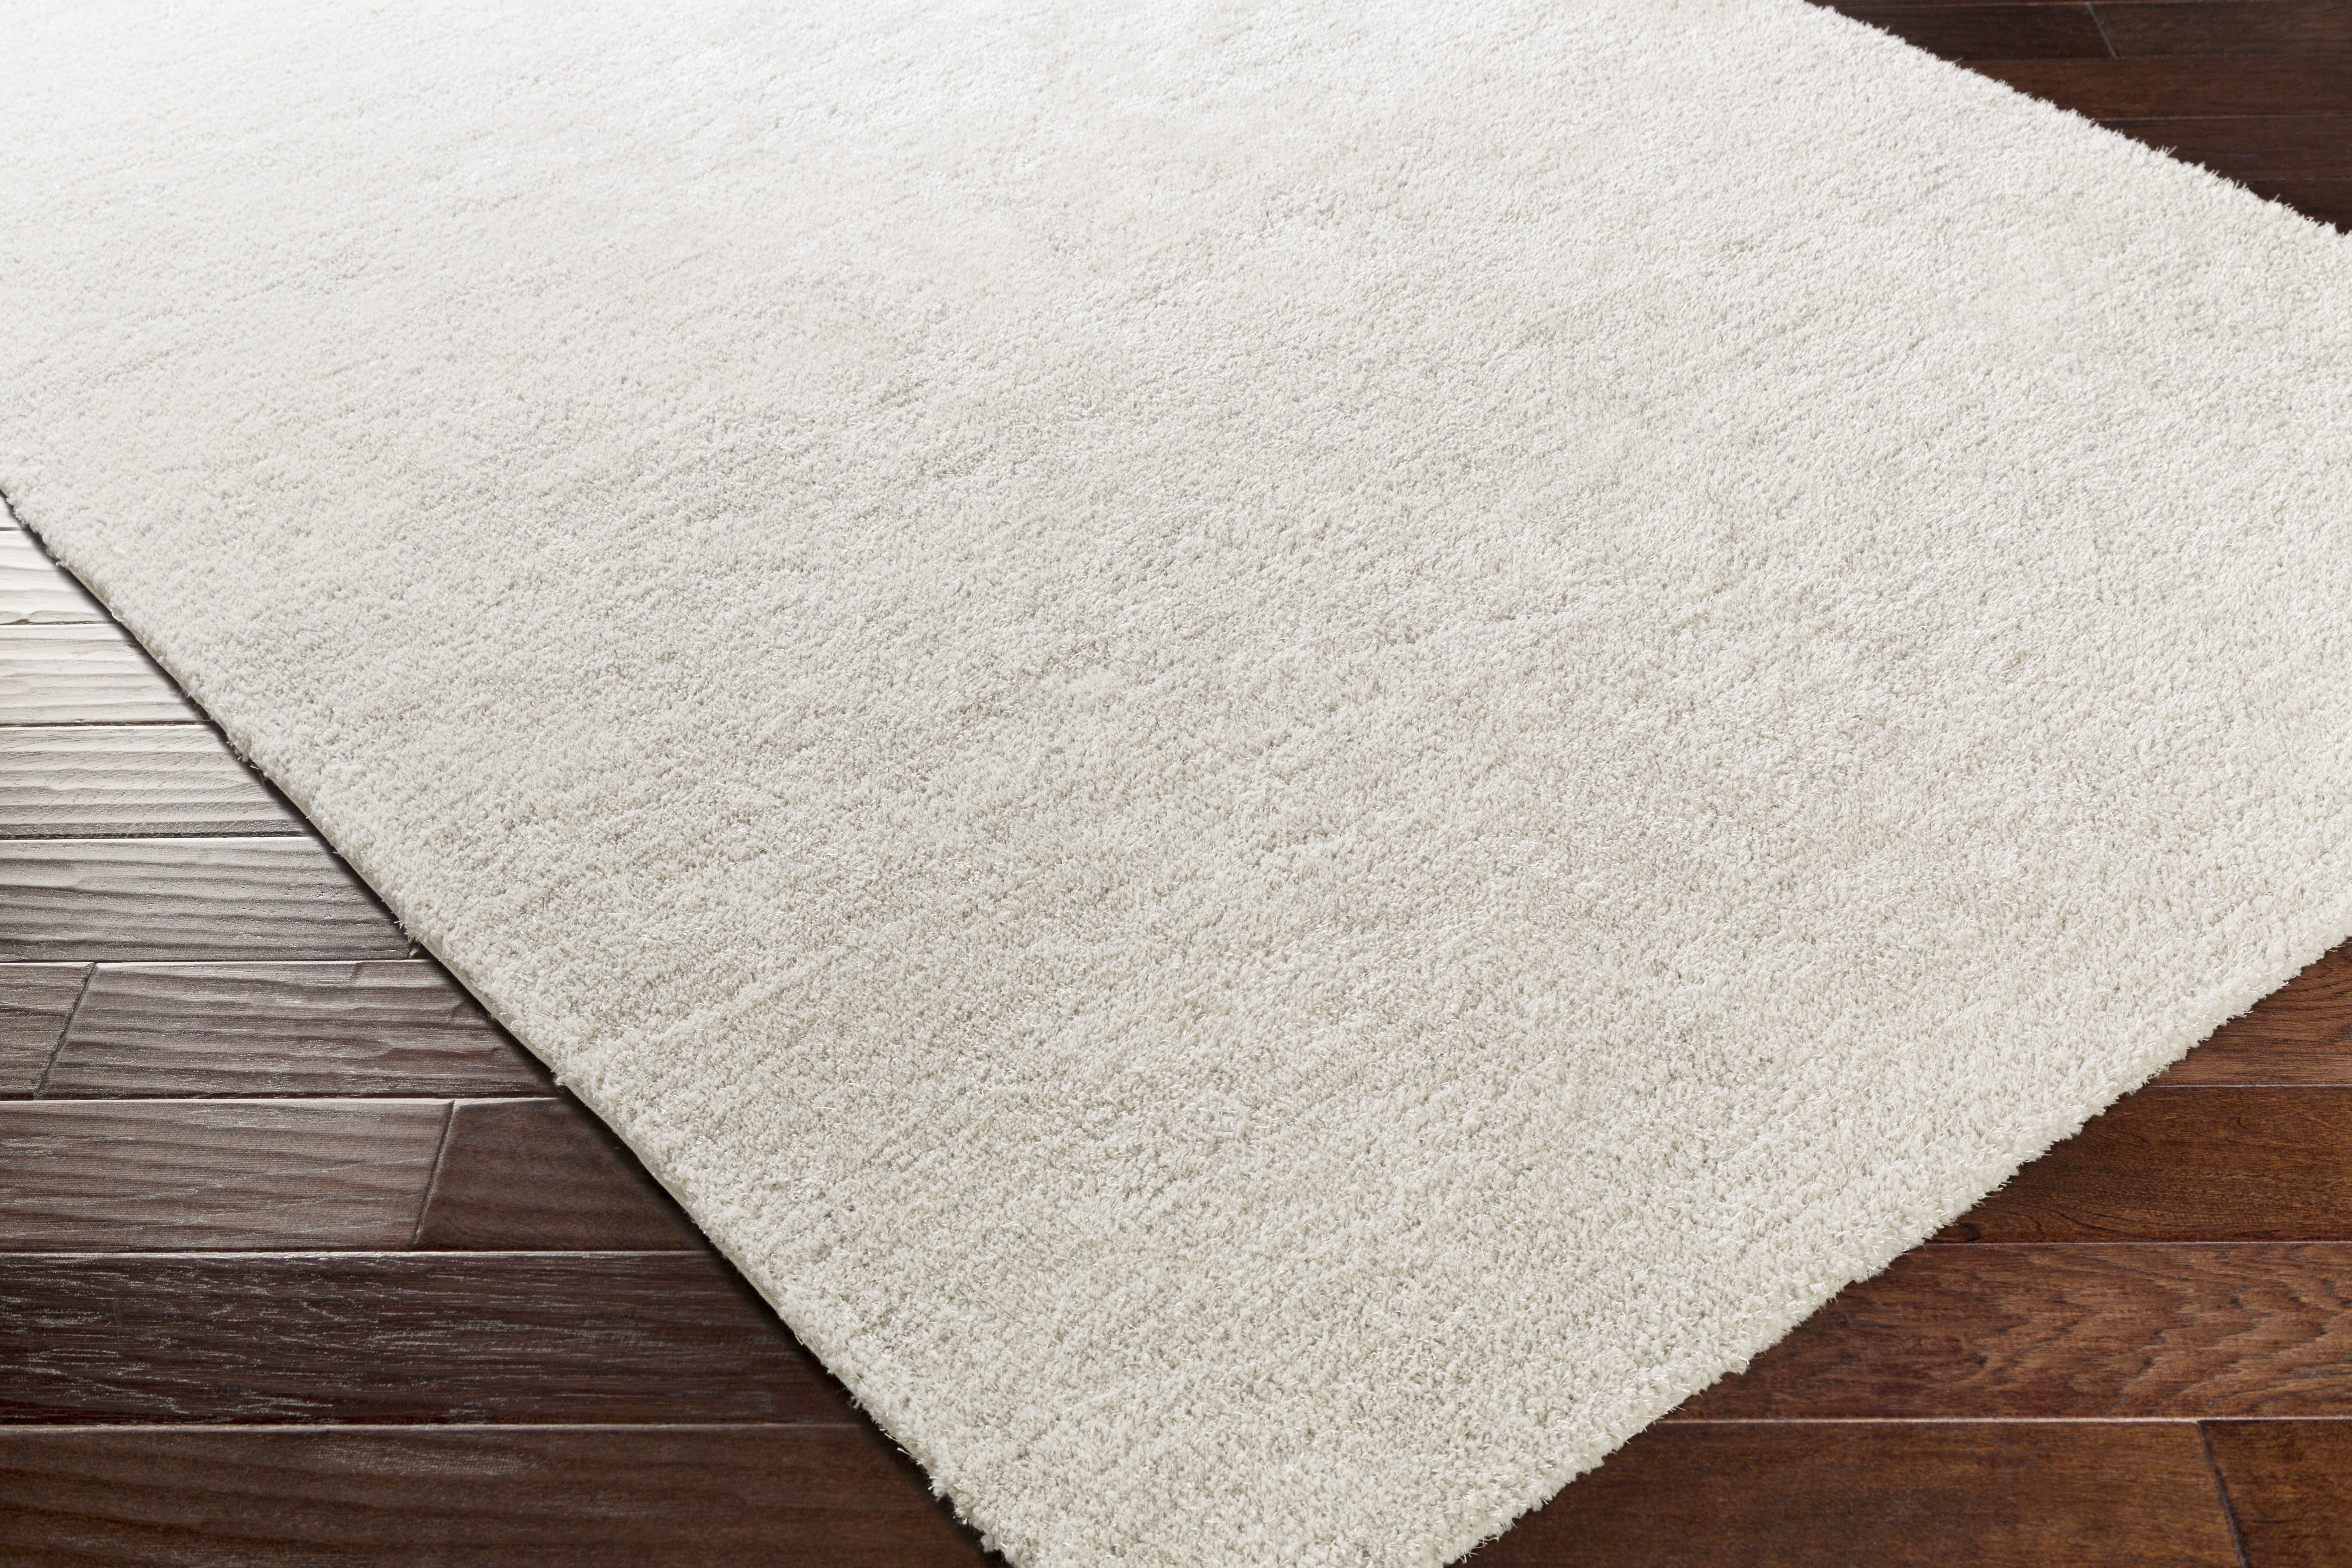 Marvin 8' x 10' Area Rug - Image 3